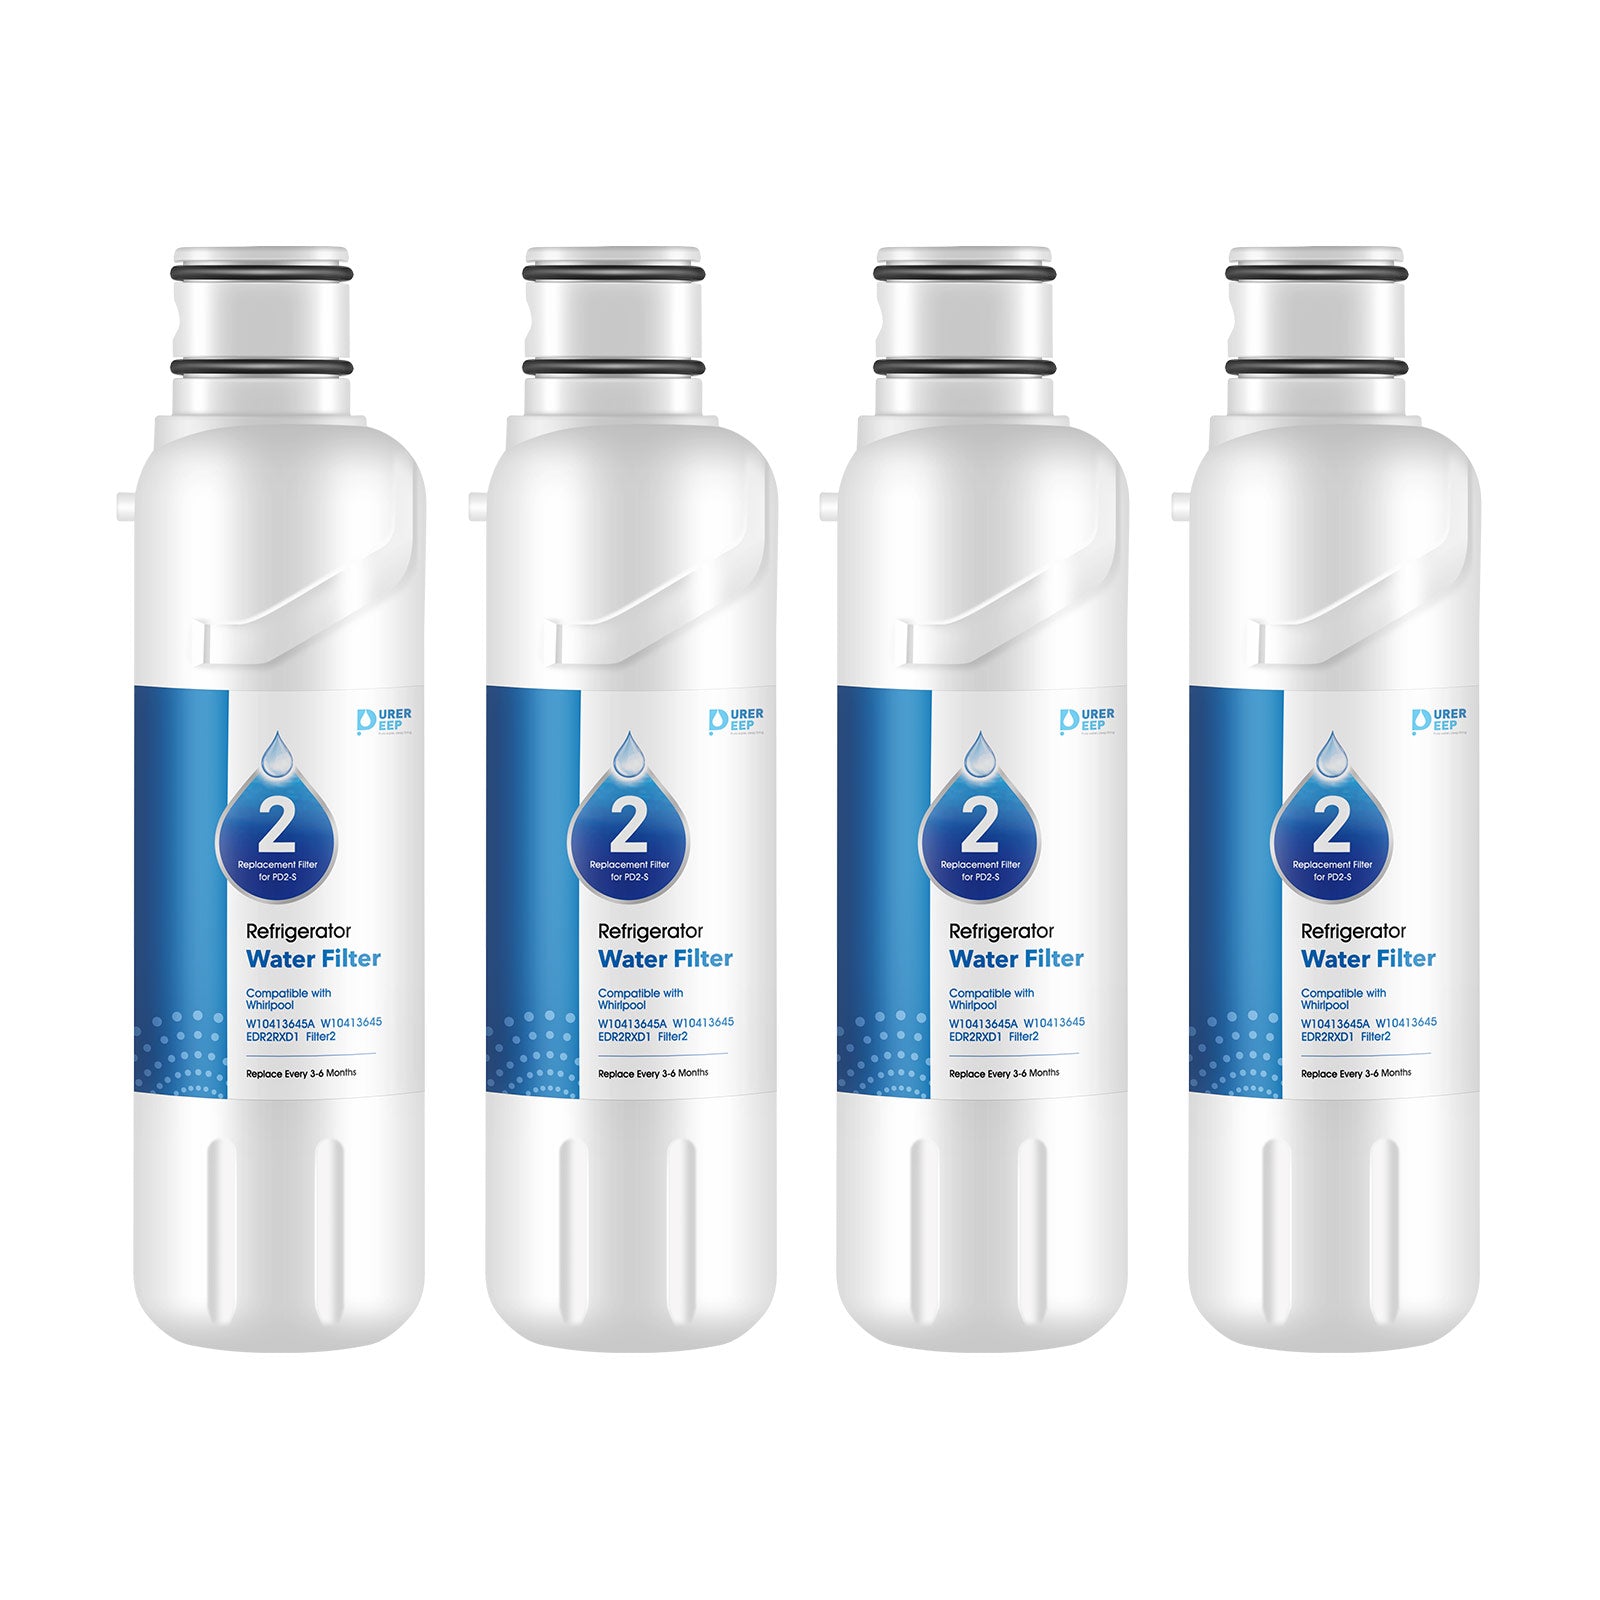 6Packs EDR2RXD1, ED2RXD2, W10413645 Water Filter 2 Replacement